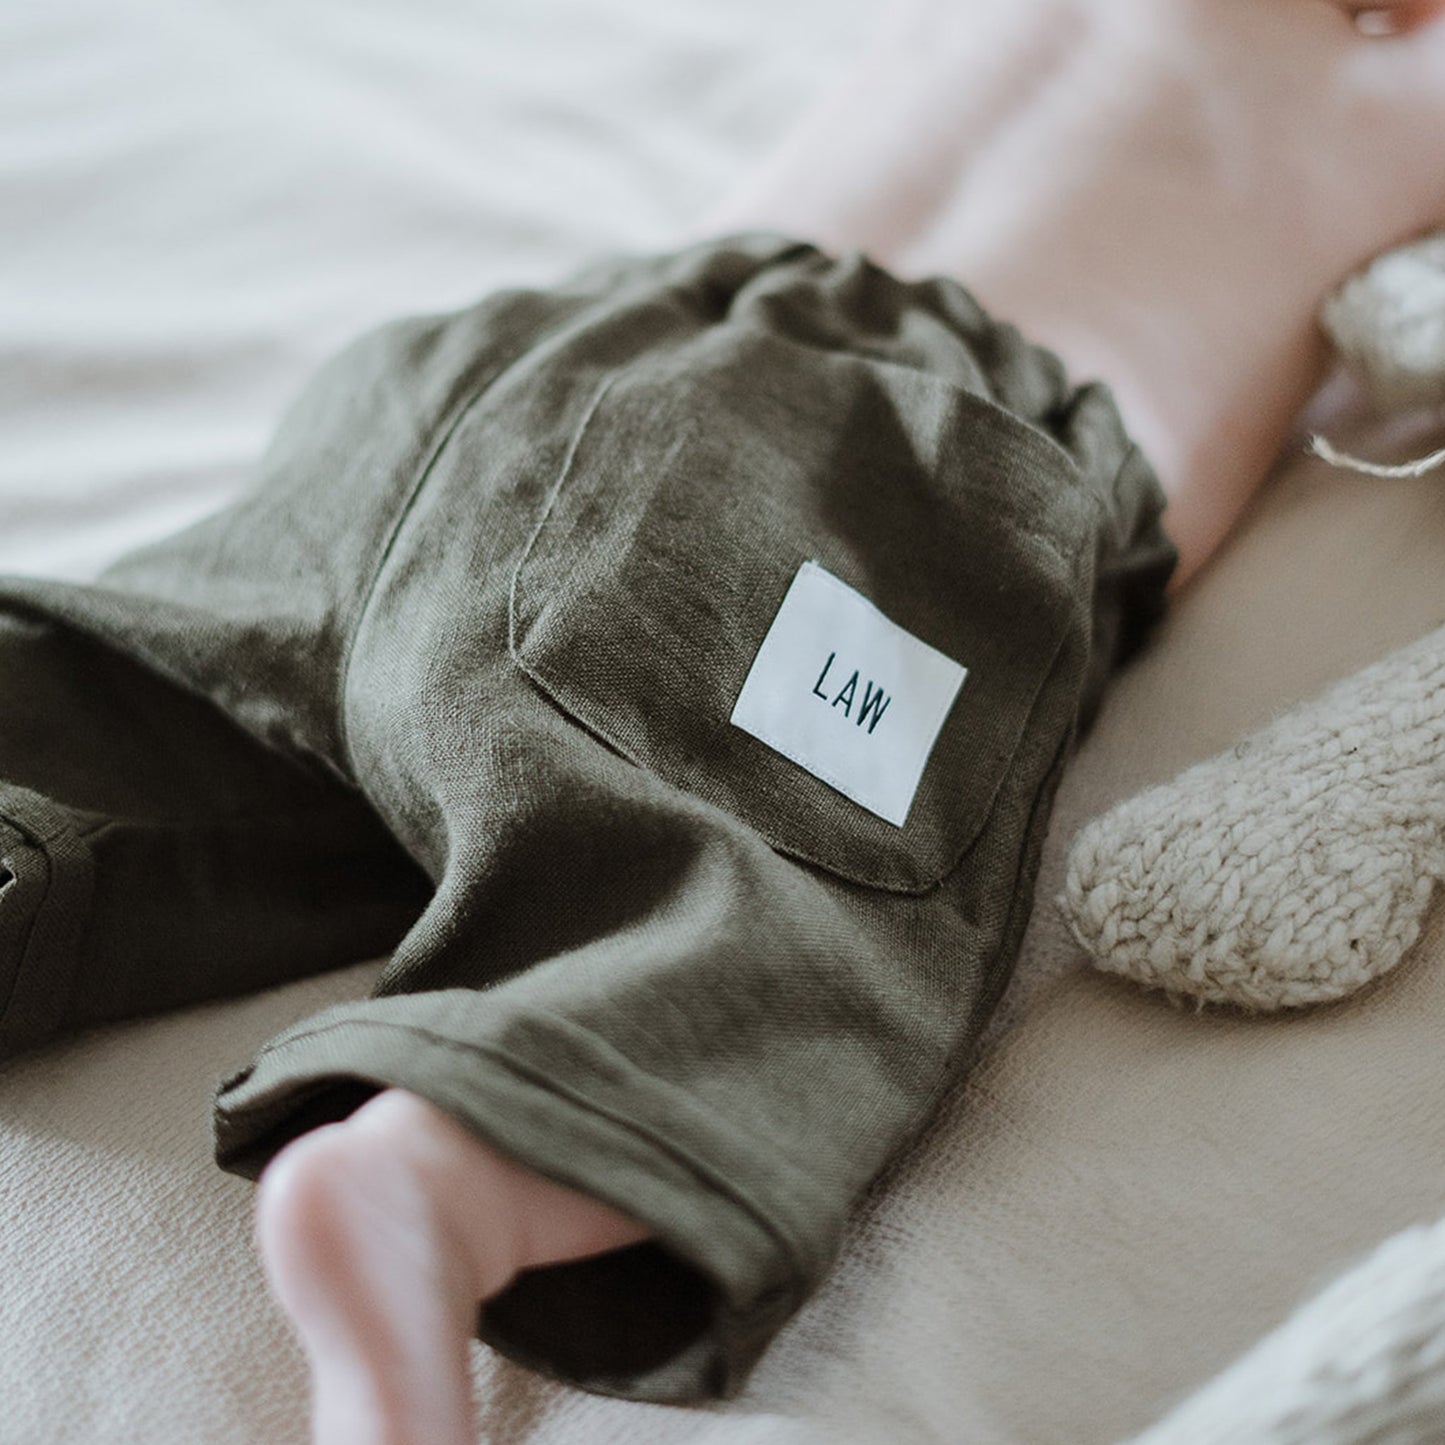 'Lina' Unisex Linen Baby Trousers - Ready to ship